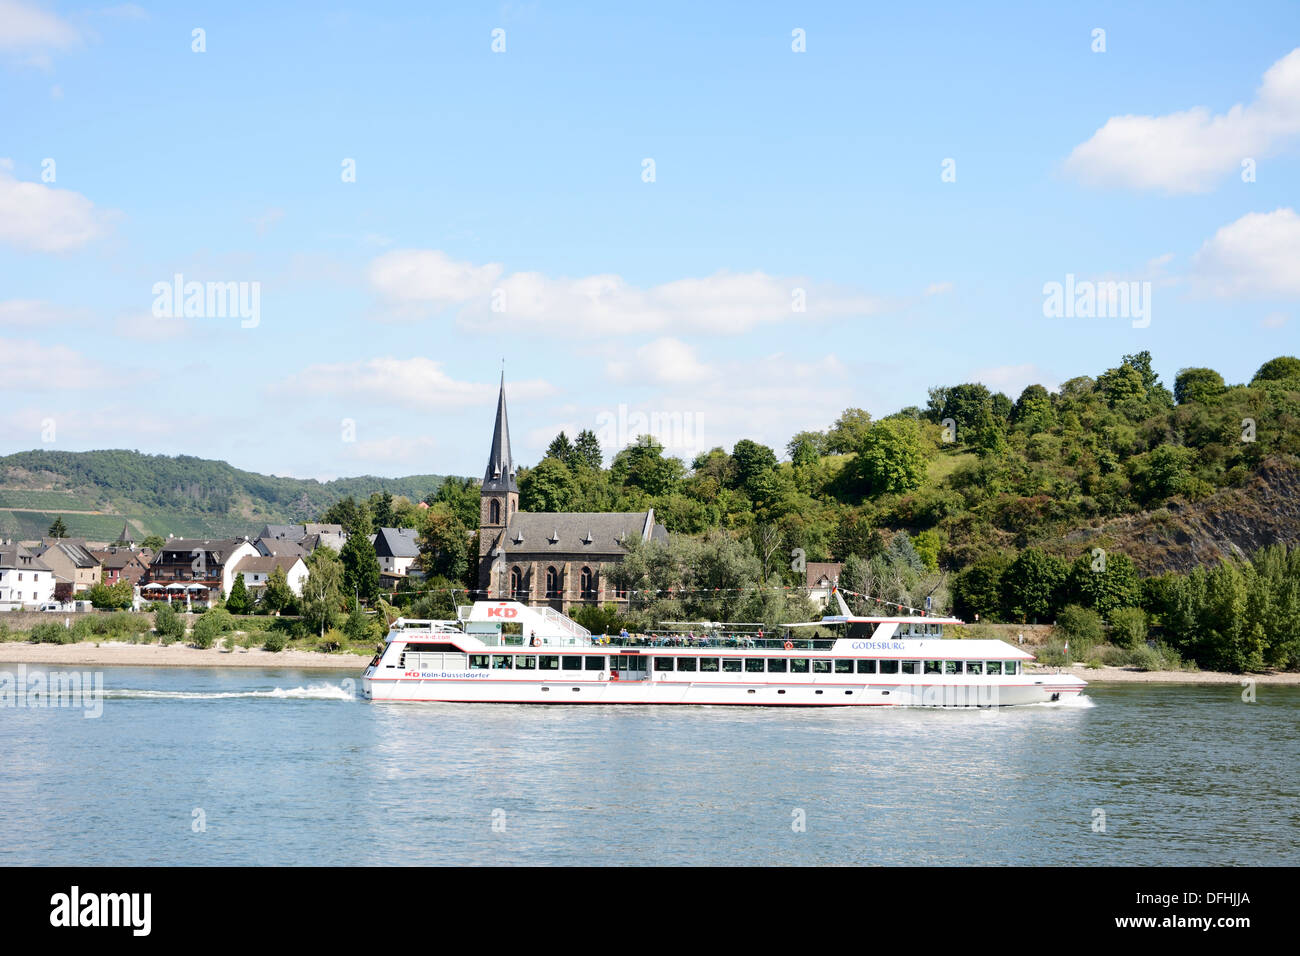 Tourists making a ship round trip on the river Rhein in Boppard, Germany Stock Photo